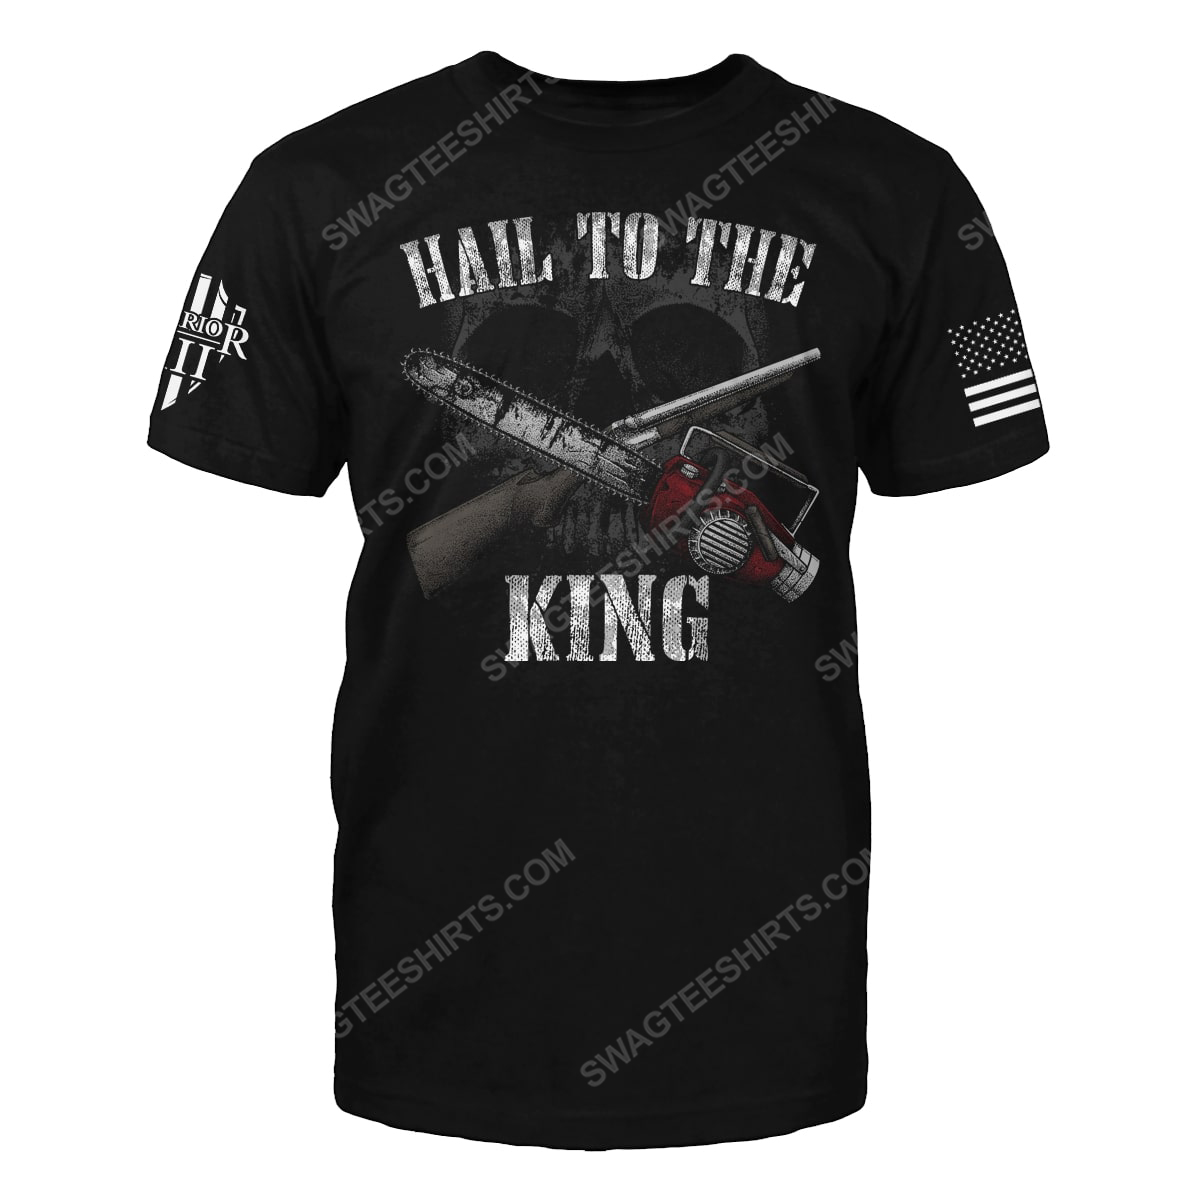 Hail to the king skull and saw shirt 4(1)